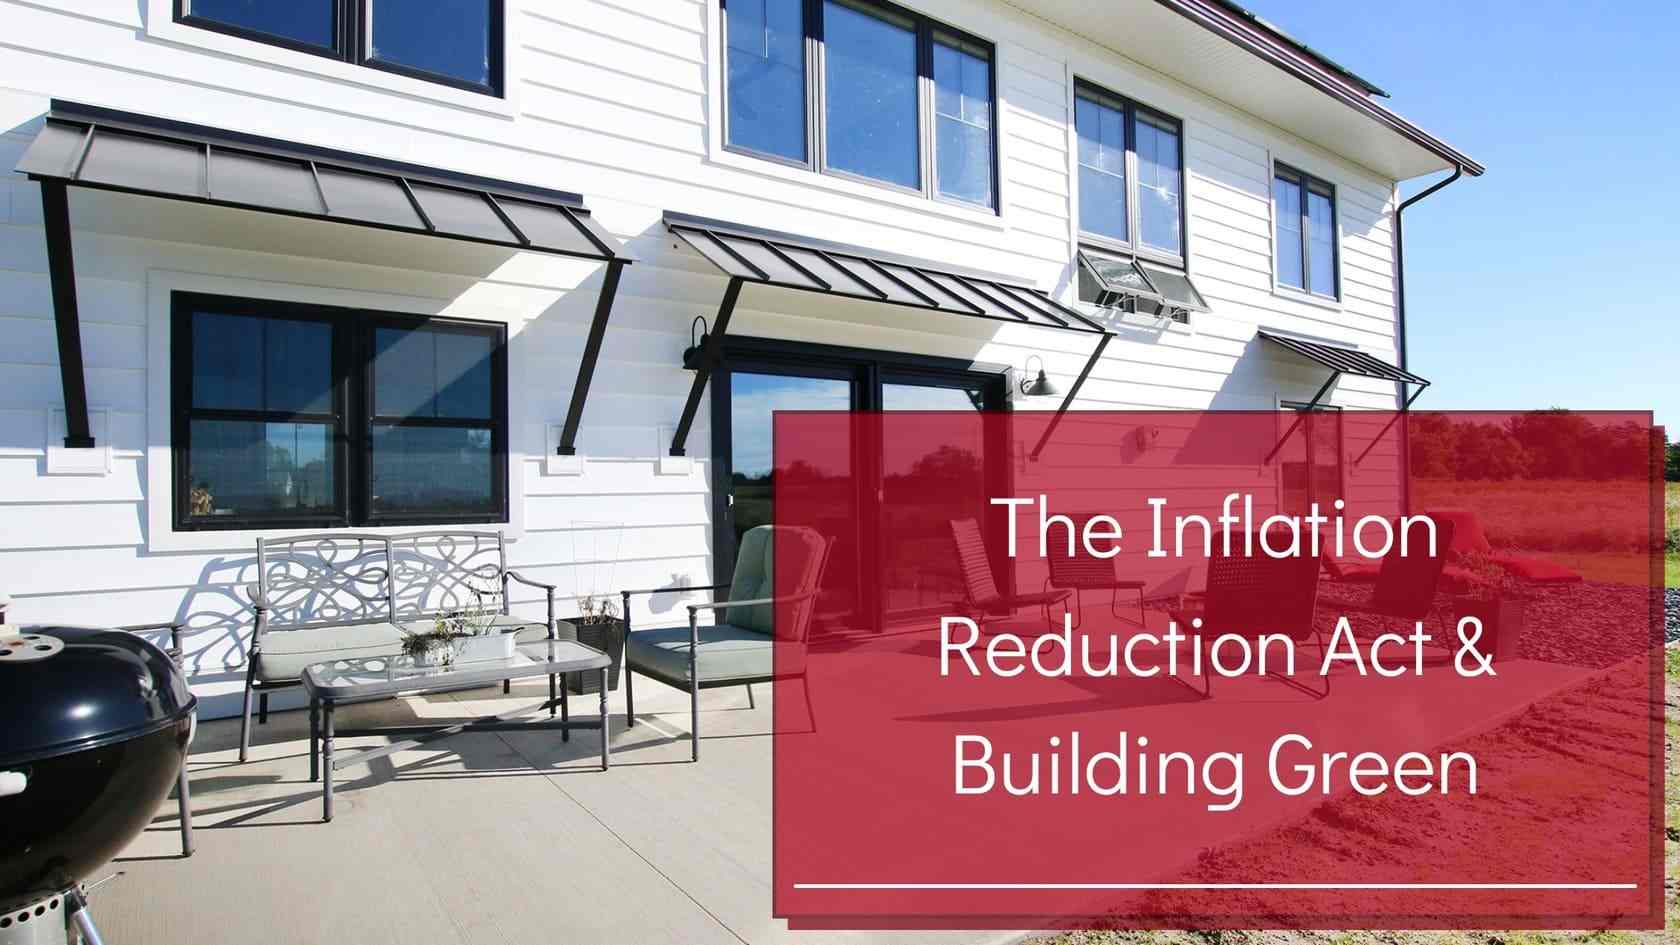 The Inflation Reduction Act & Building Green